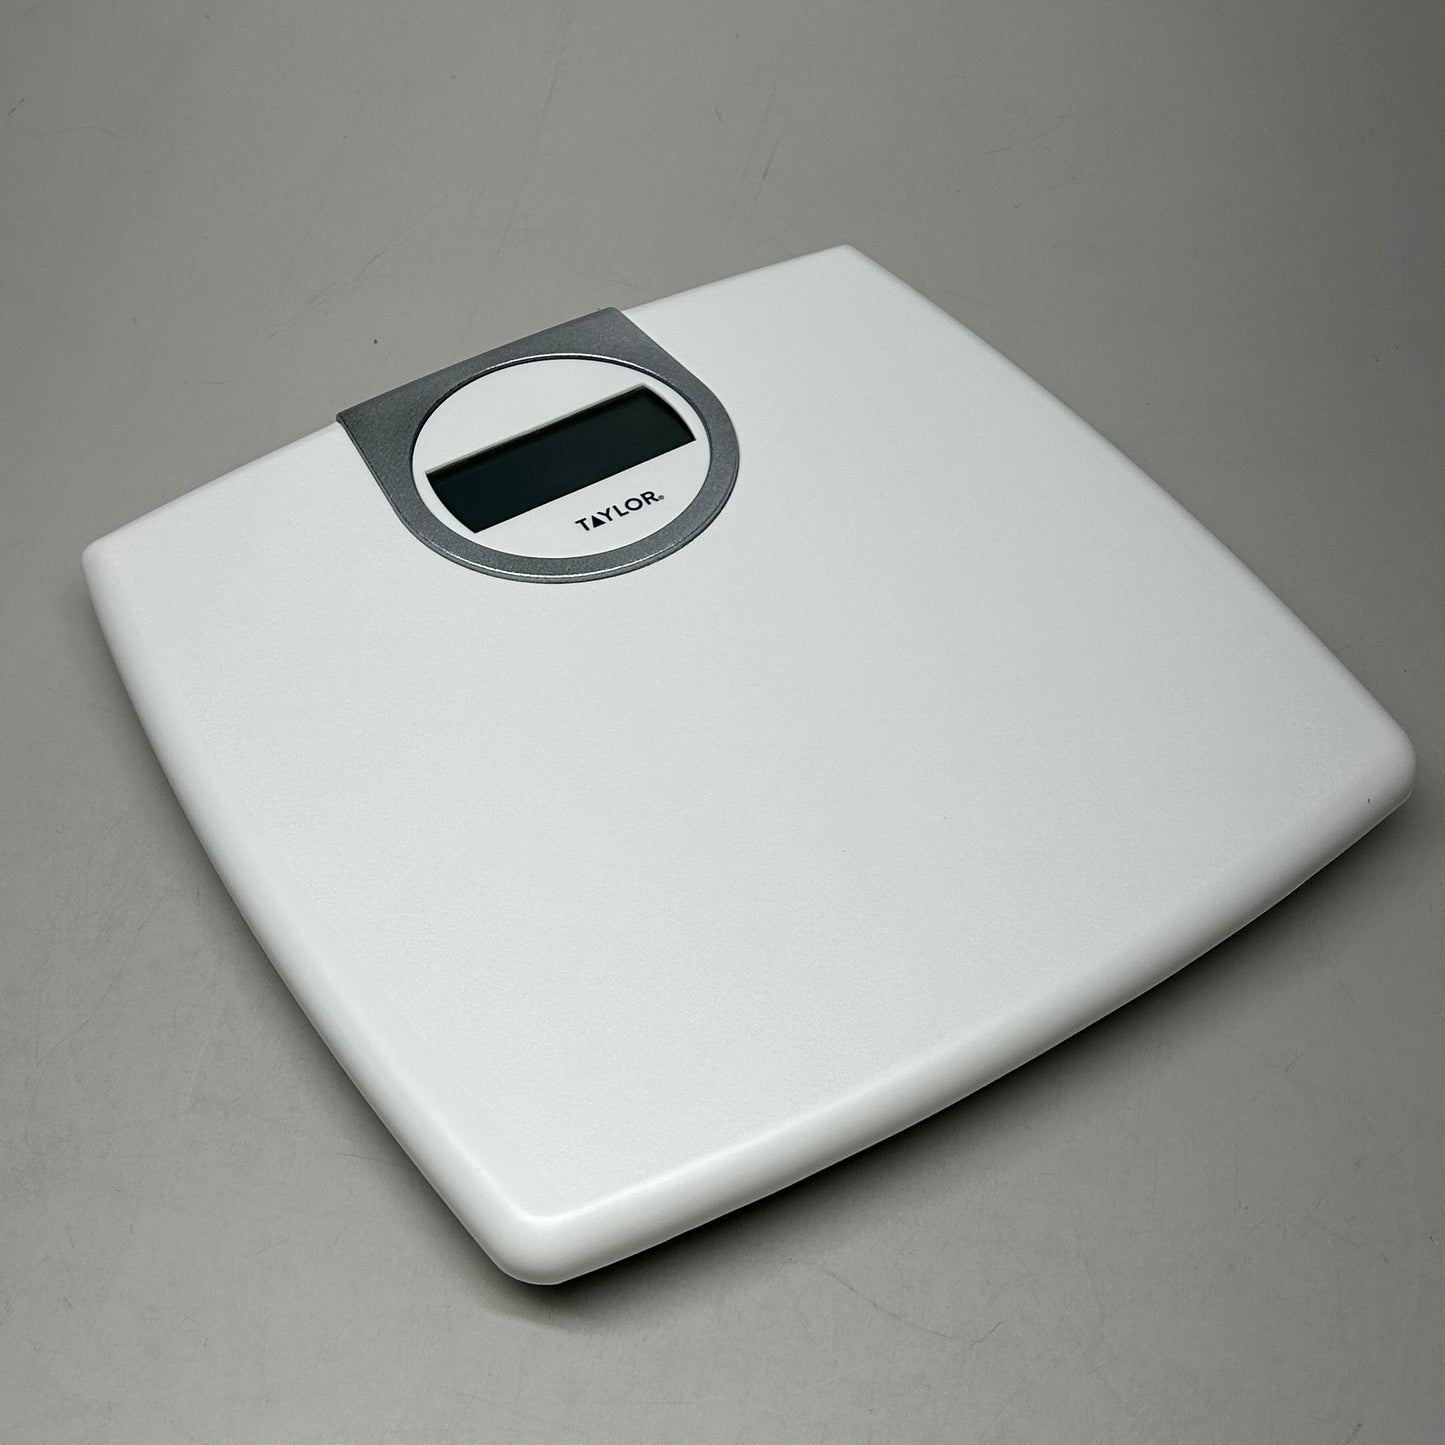 TAYLOR Digital Bathroom Scale White Textured Finish 702940133 (New)